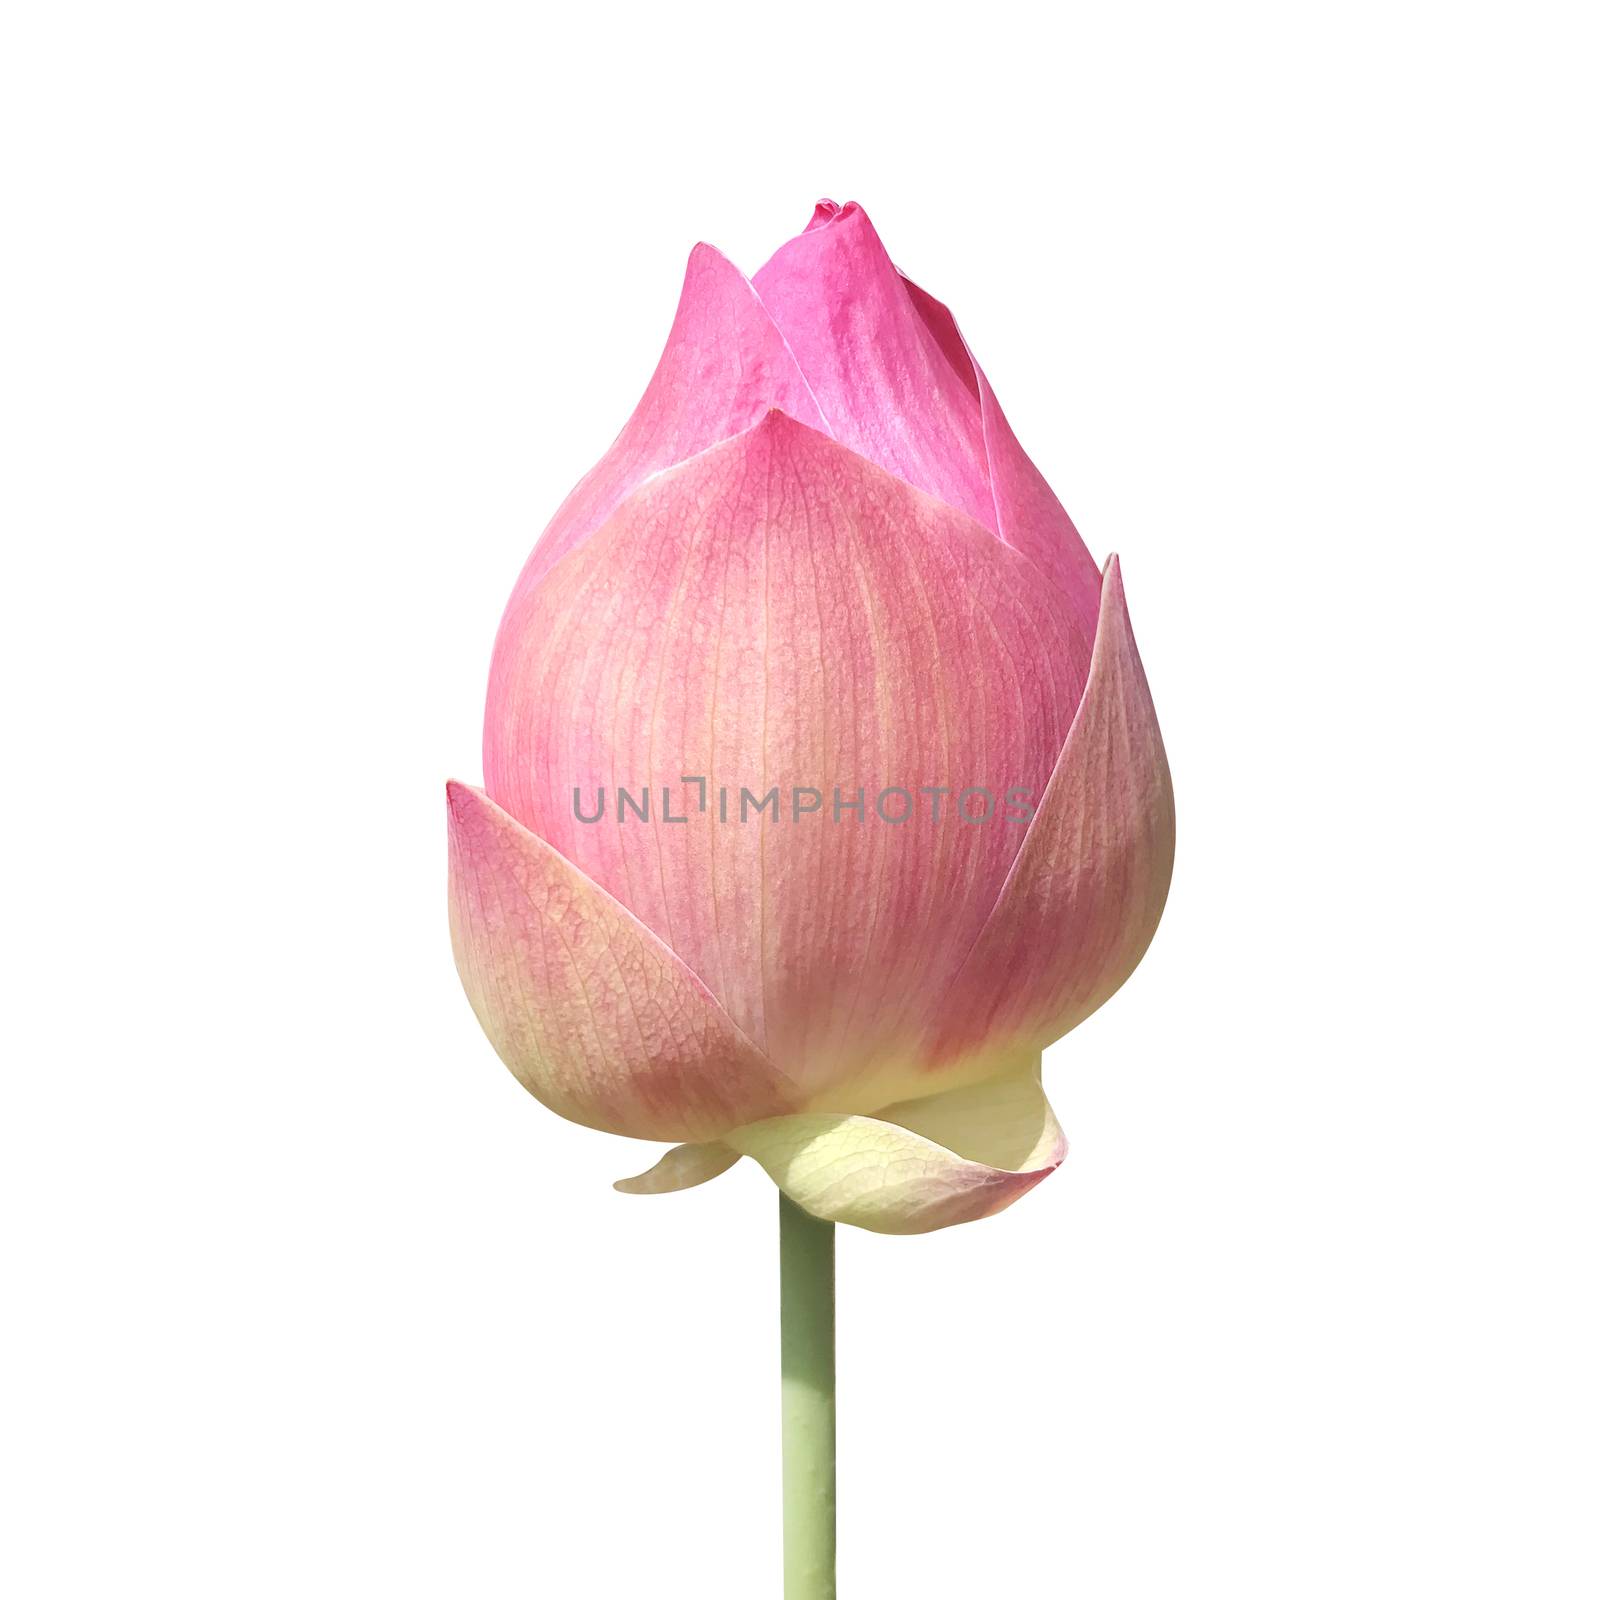 lotus bud isolated on white background, lotus pink close-up photos, lotus bud pink flower, beautiful buds pink nature by cgdeaw